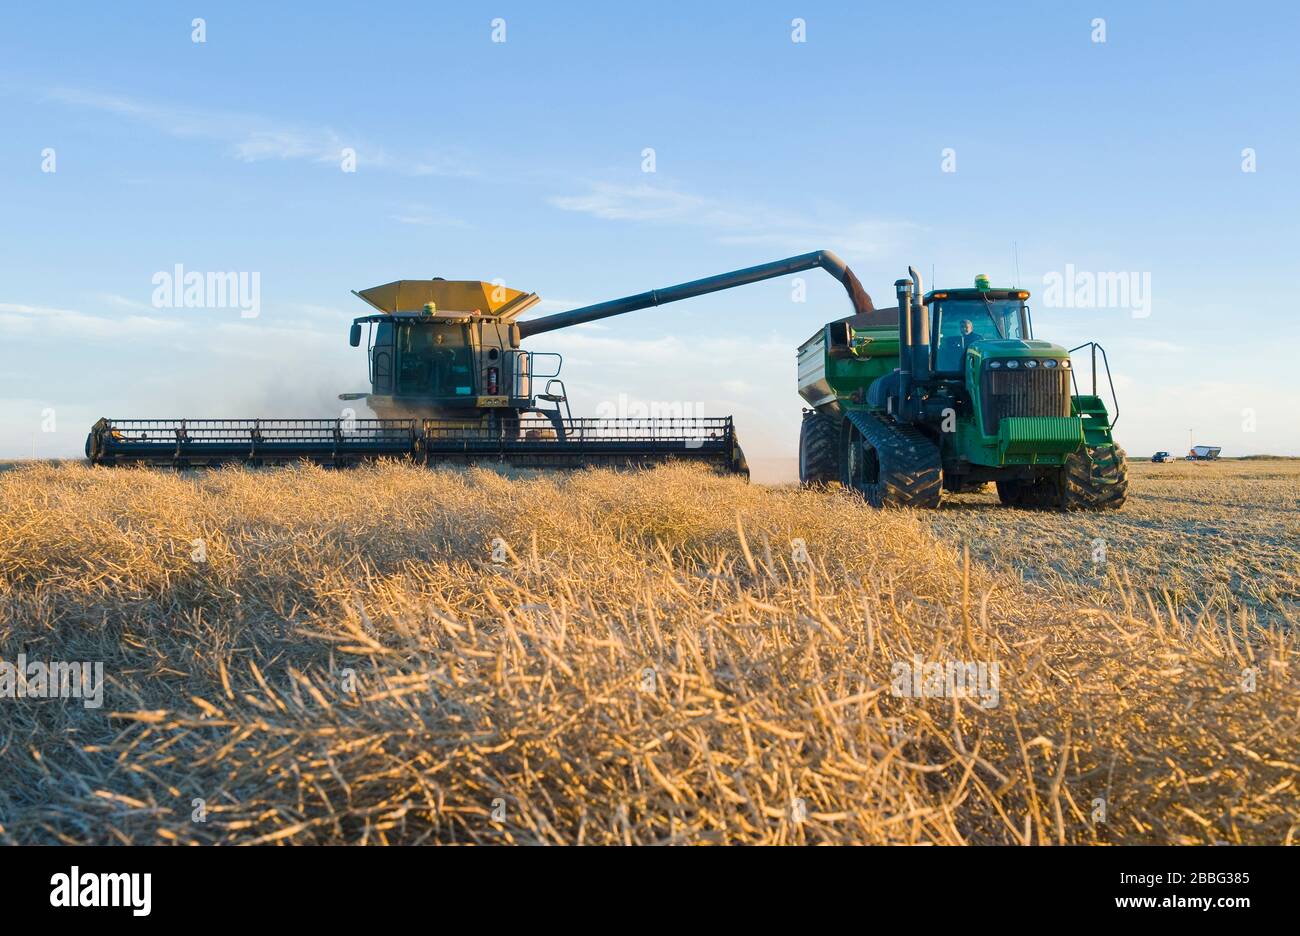 a combine harvester straight cuts a mature standing field of canola while unloading into a grain wagon on the go during the harvest, near Brunkild, Manitoba, Canada Stock Photo